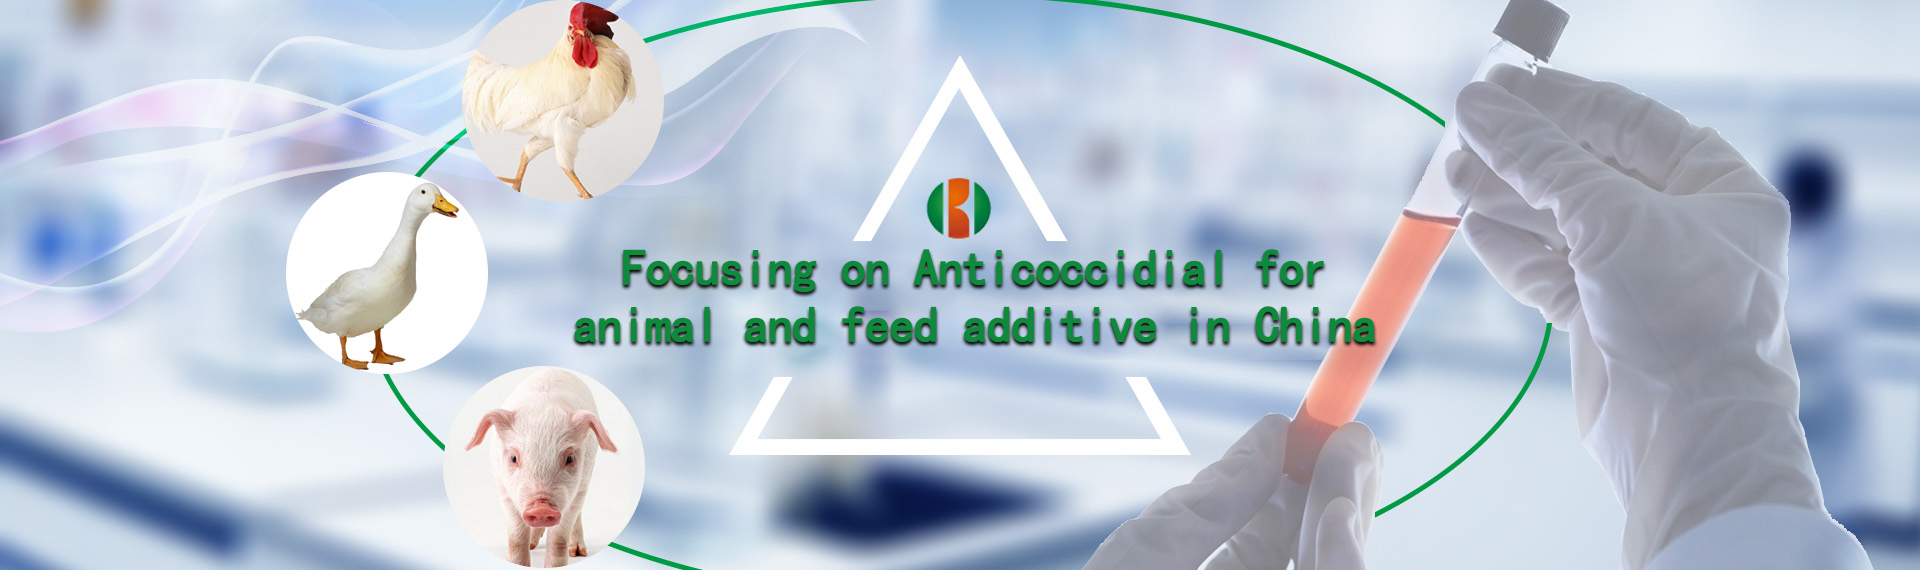 Focusing on Ant i coccidial foran imal and feed additive in China